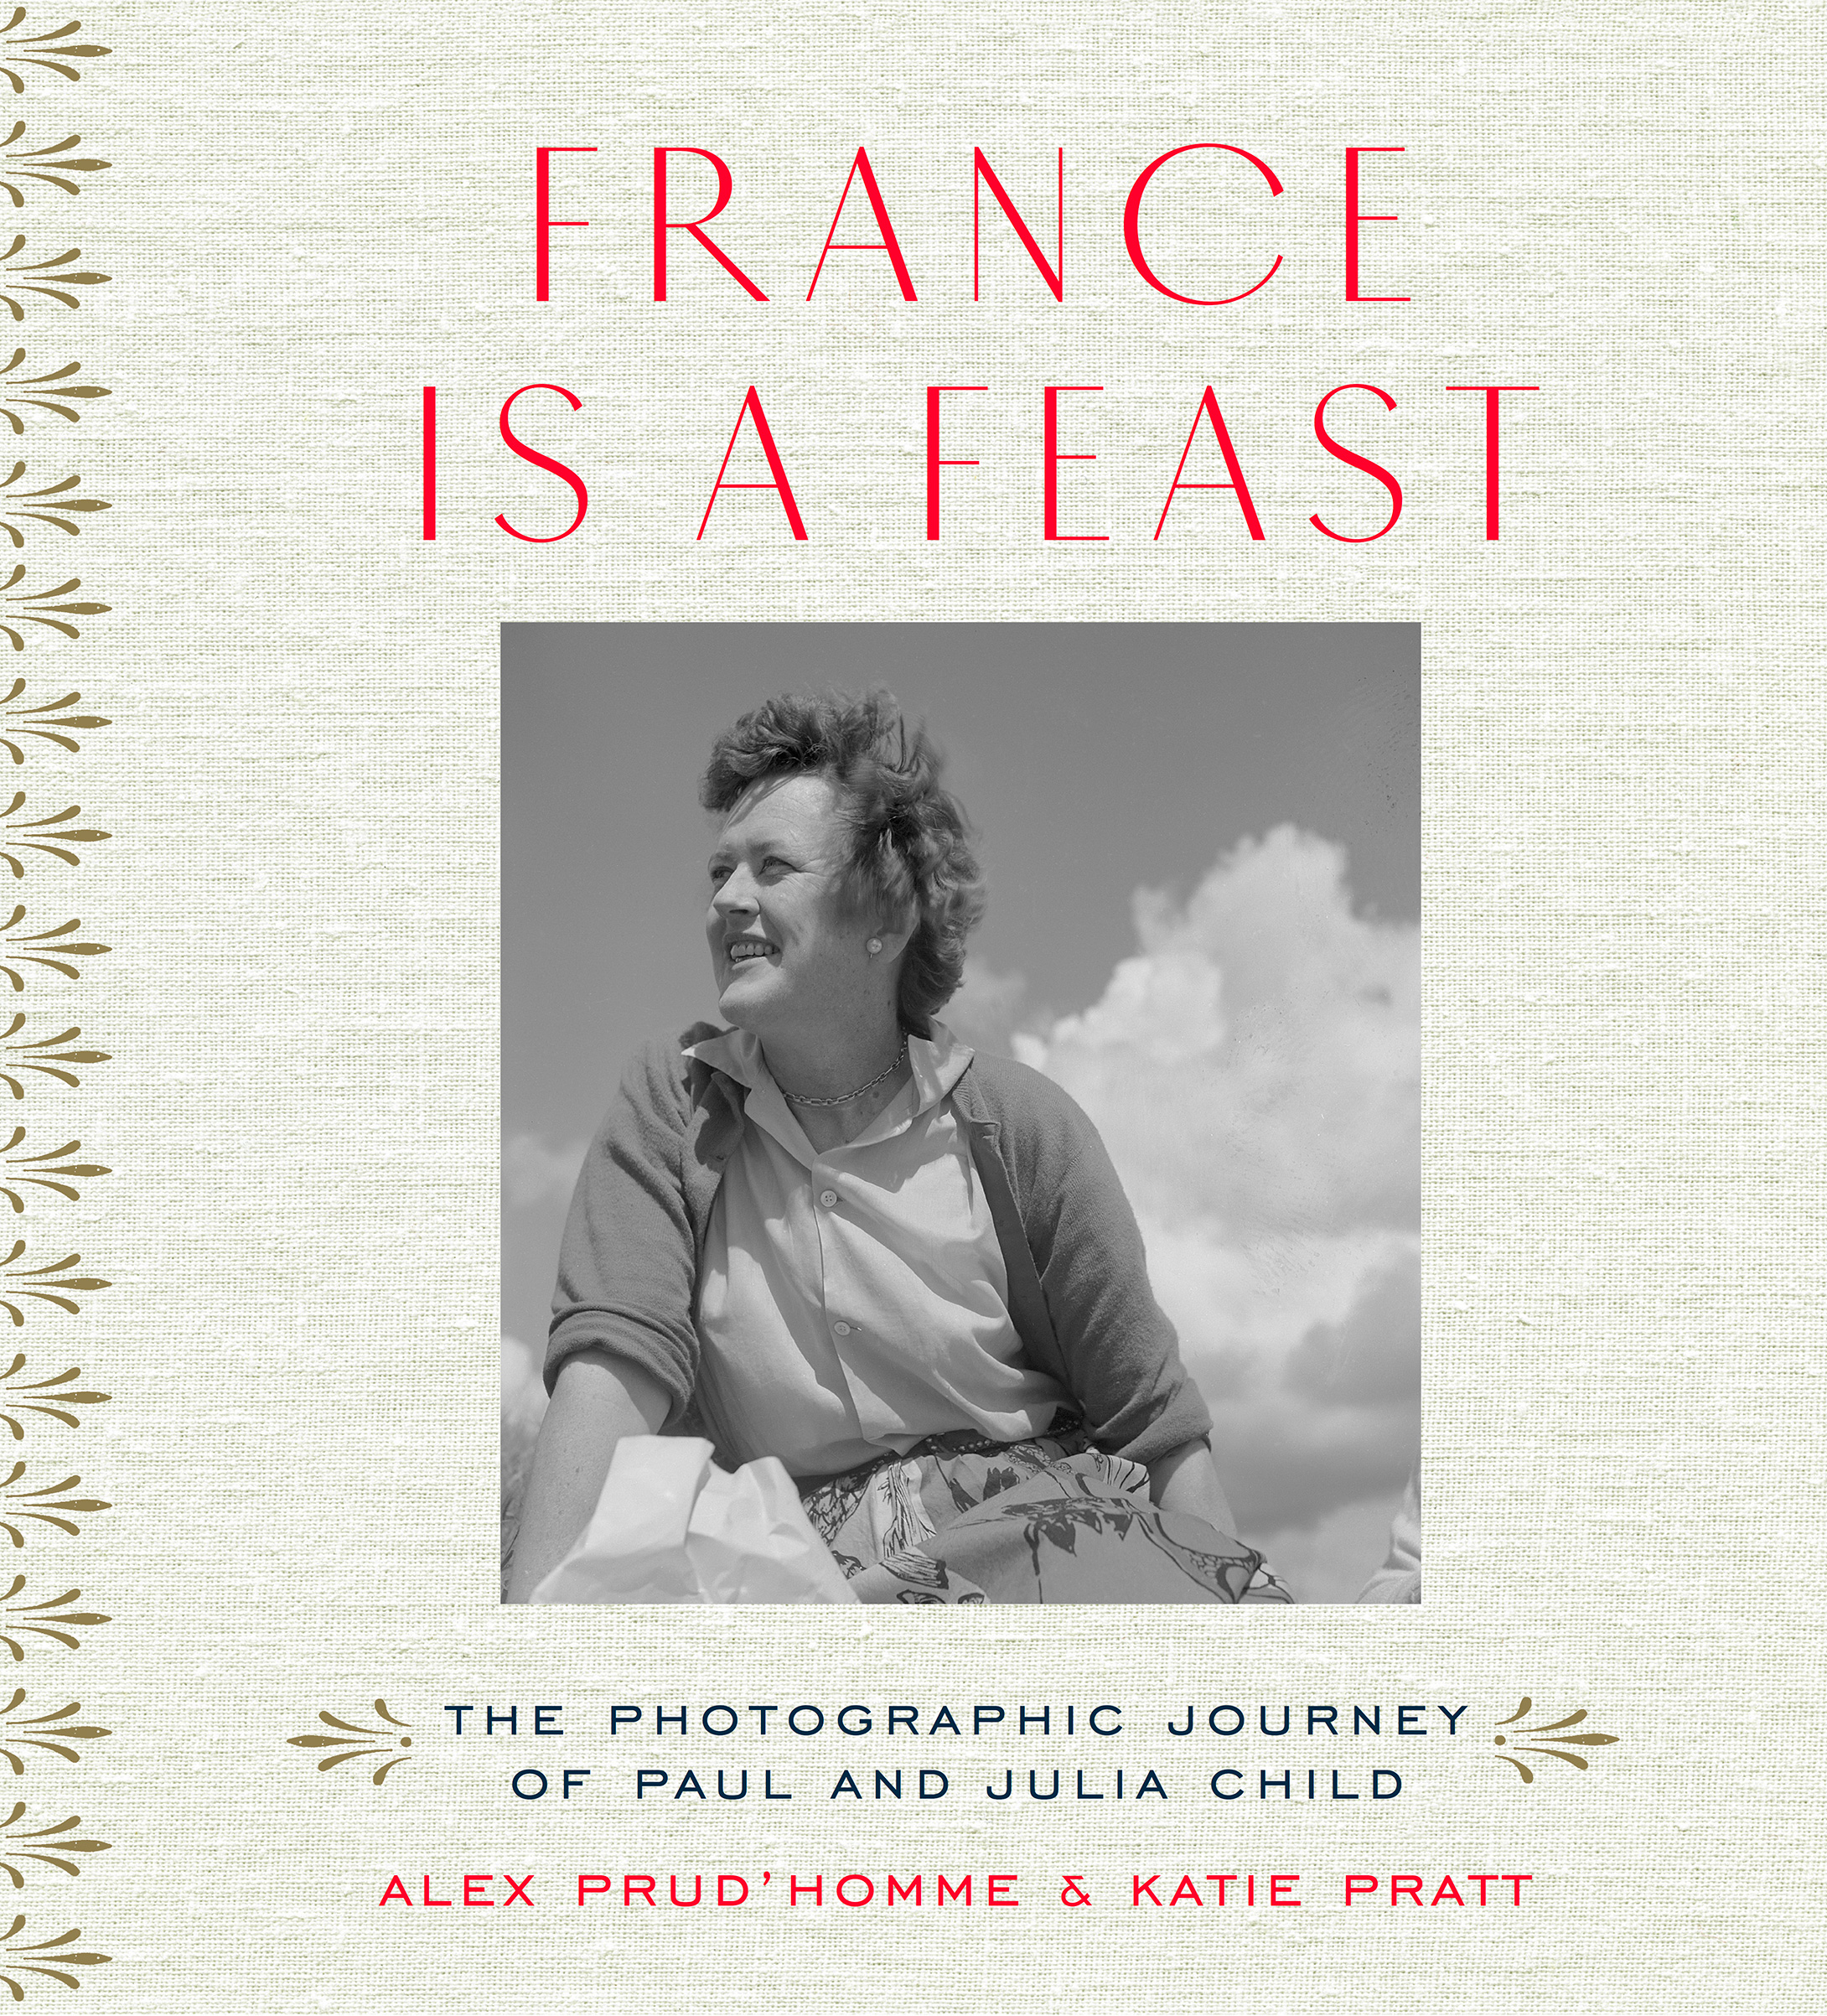 France Is A Feast: The Photographic Journey of Paul and Julia Child book cover.